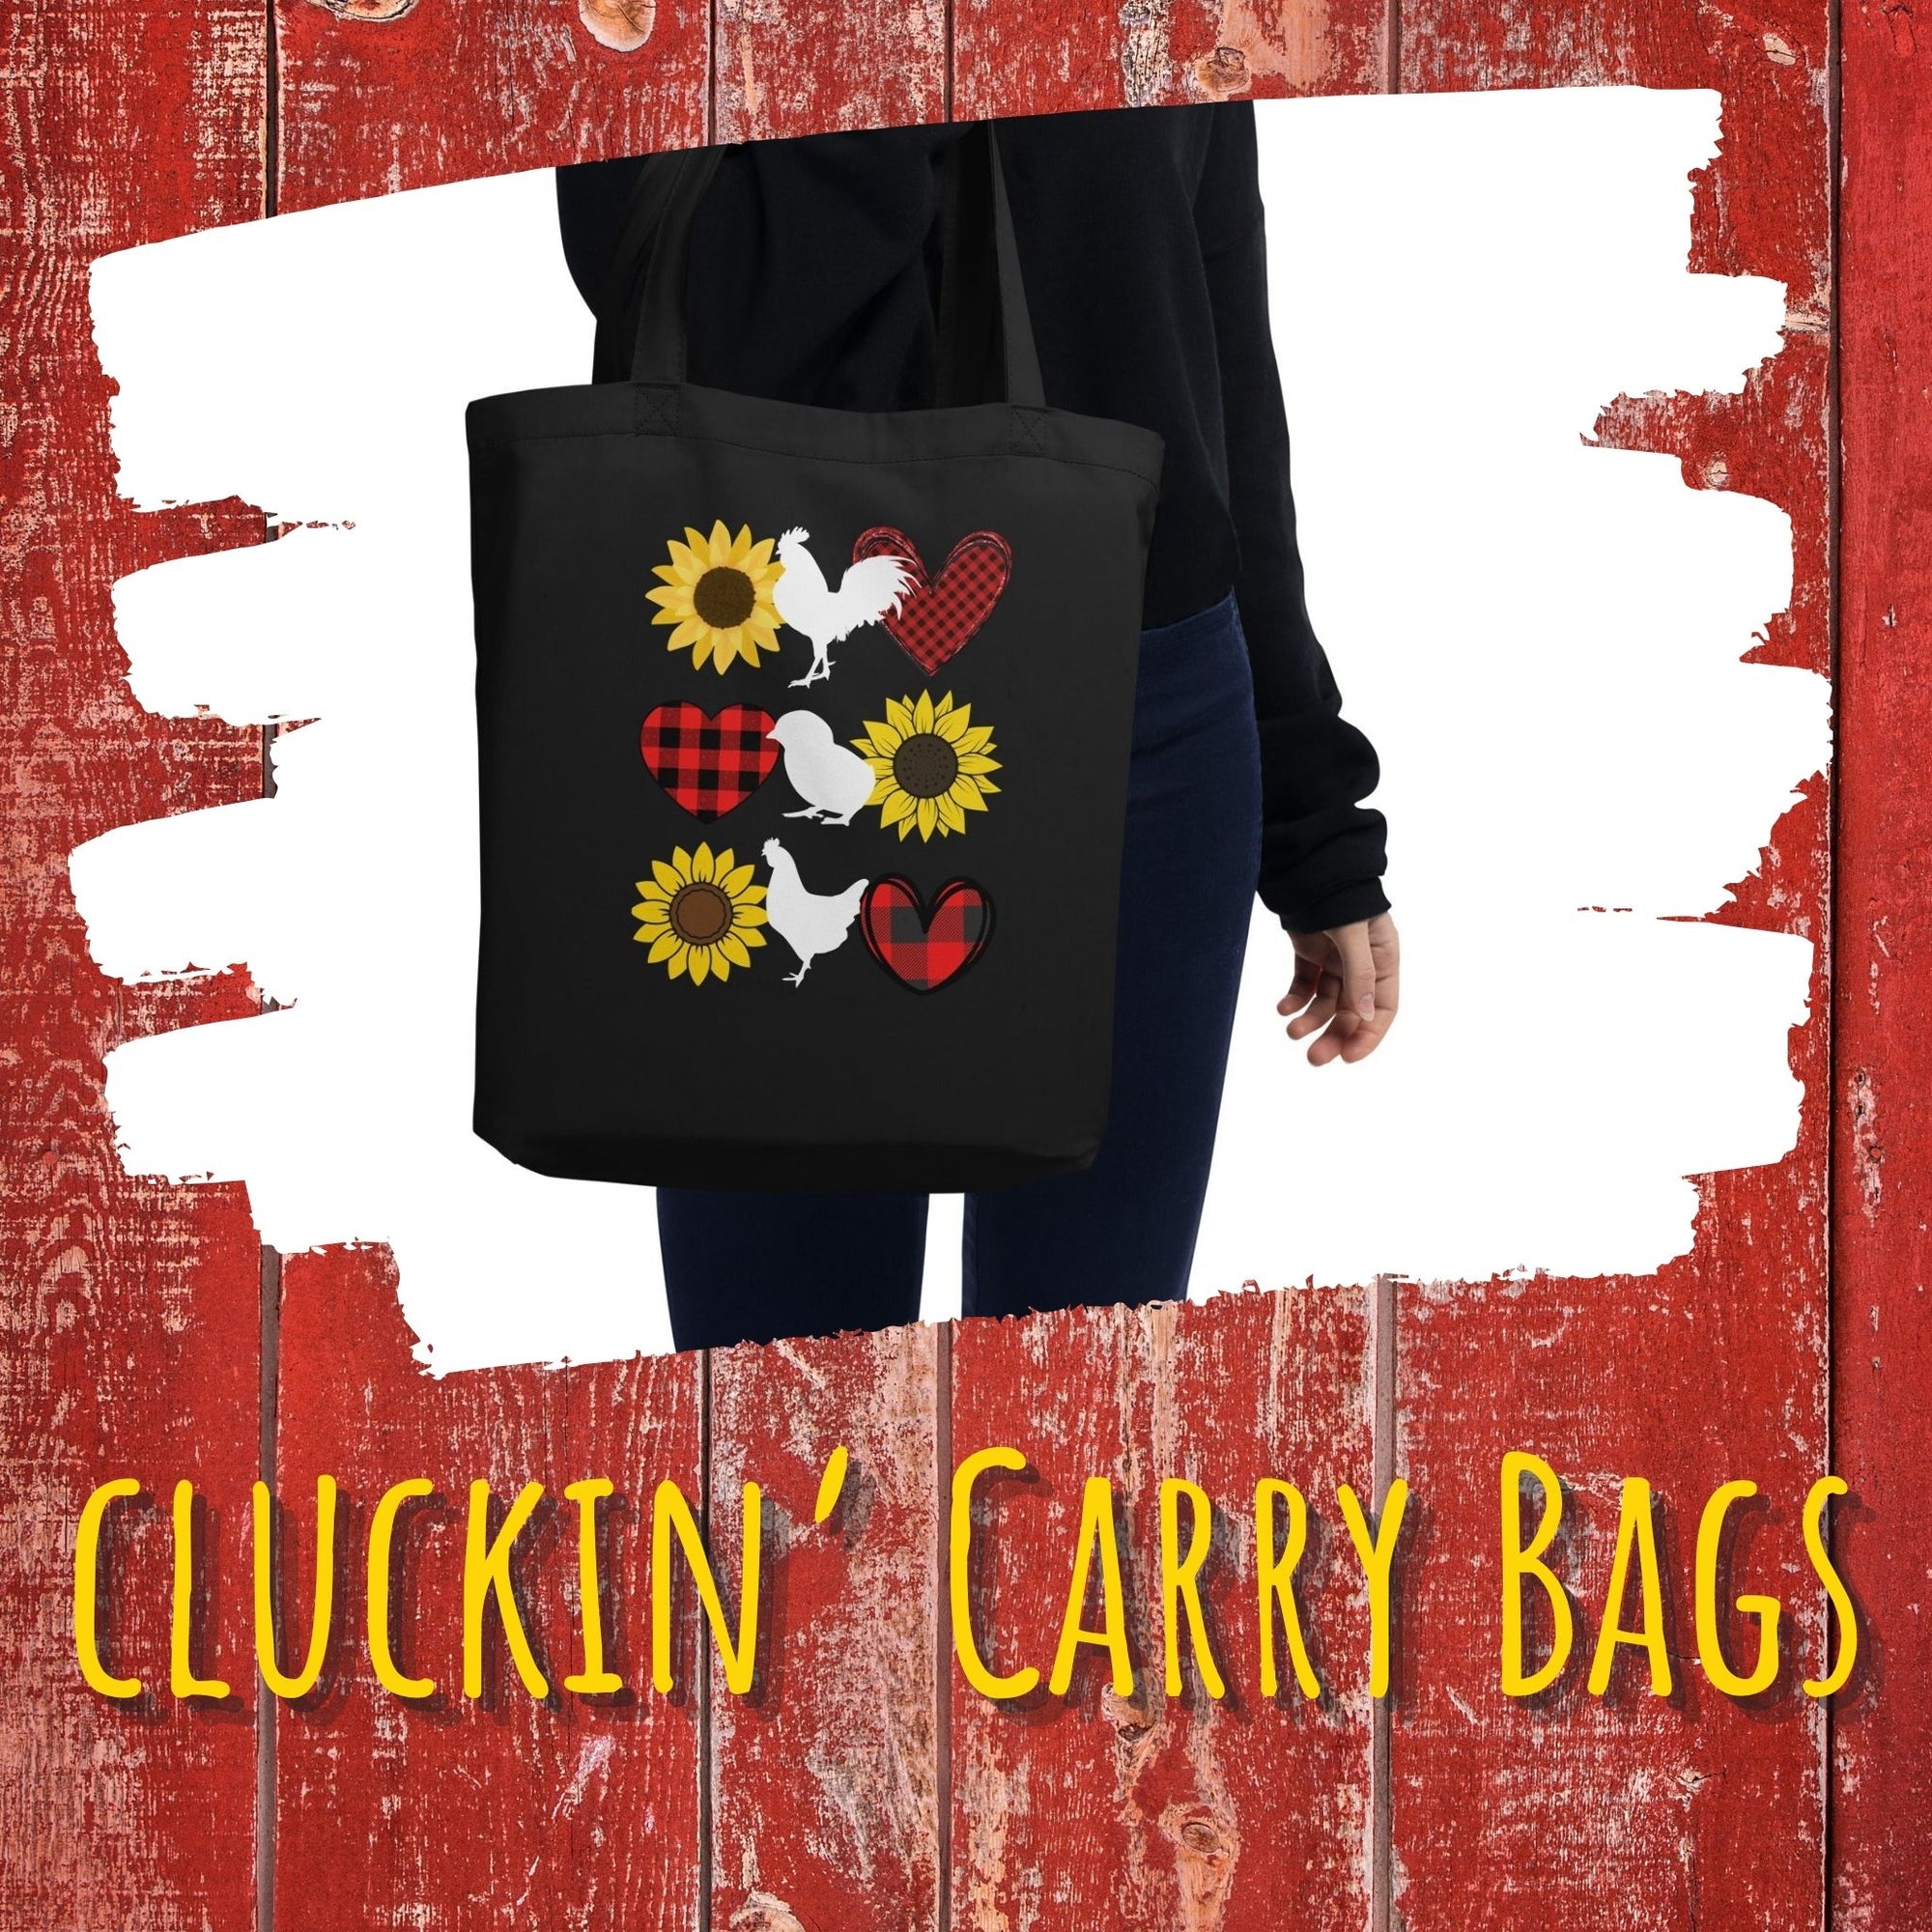 Cluck'n'Carry Bags